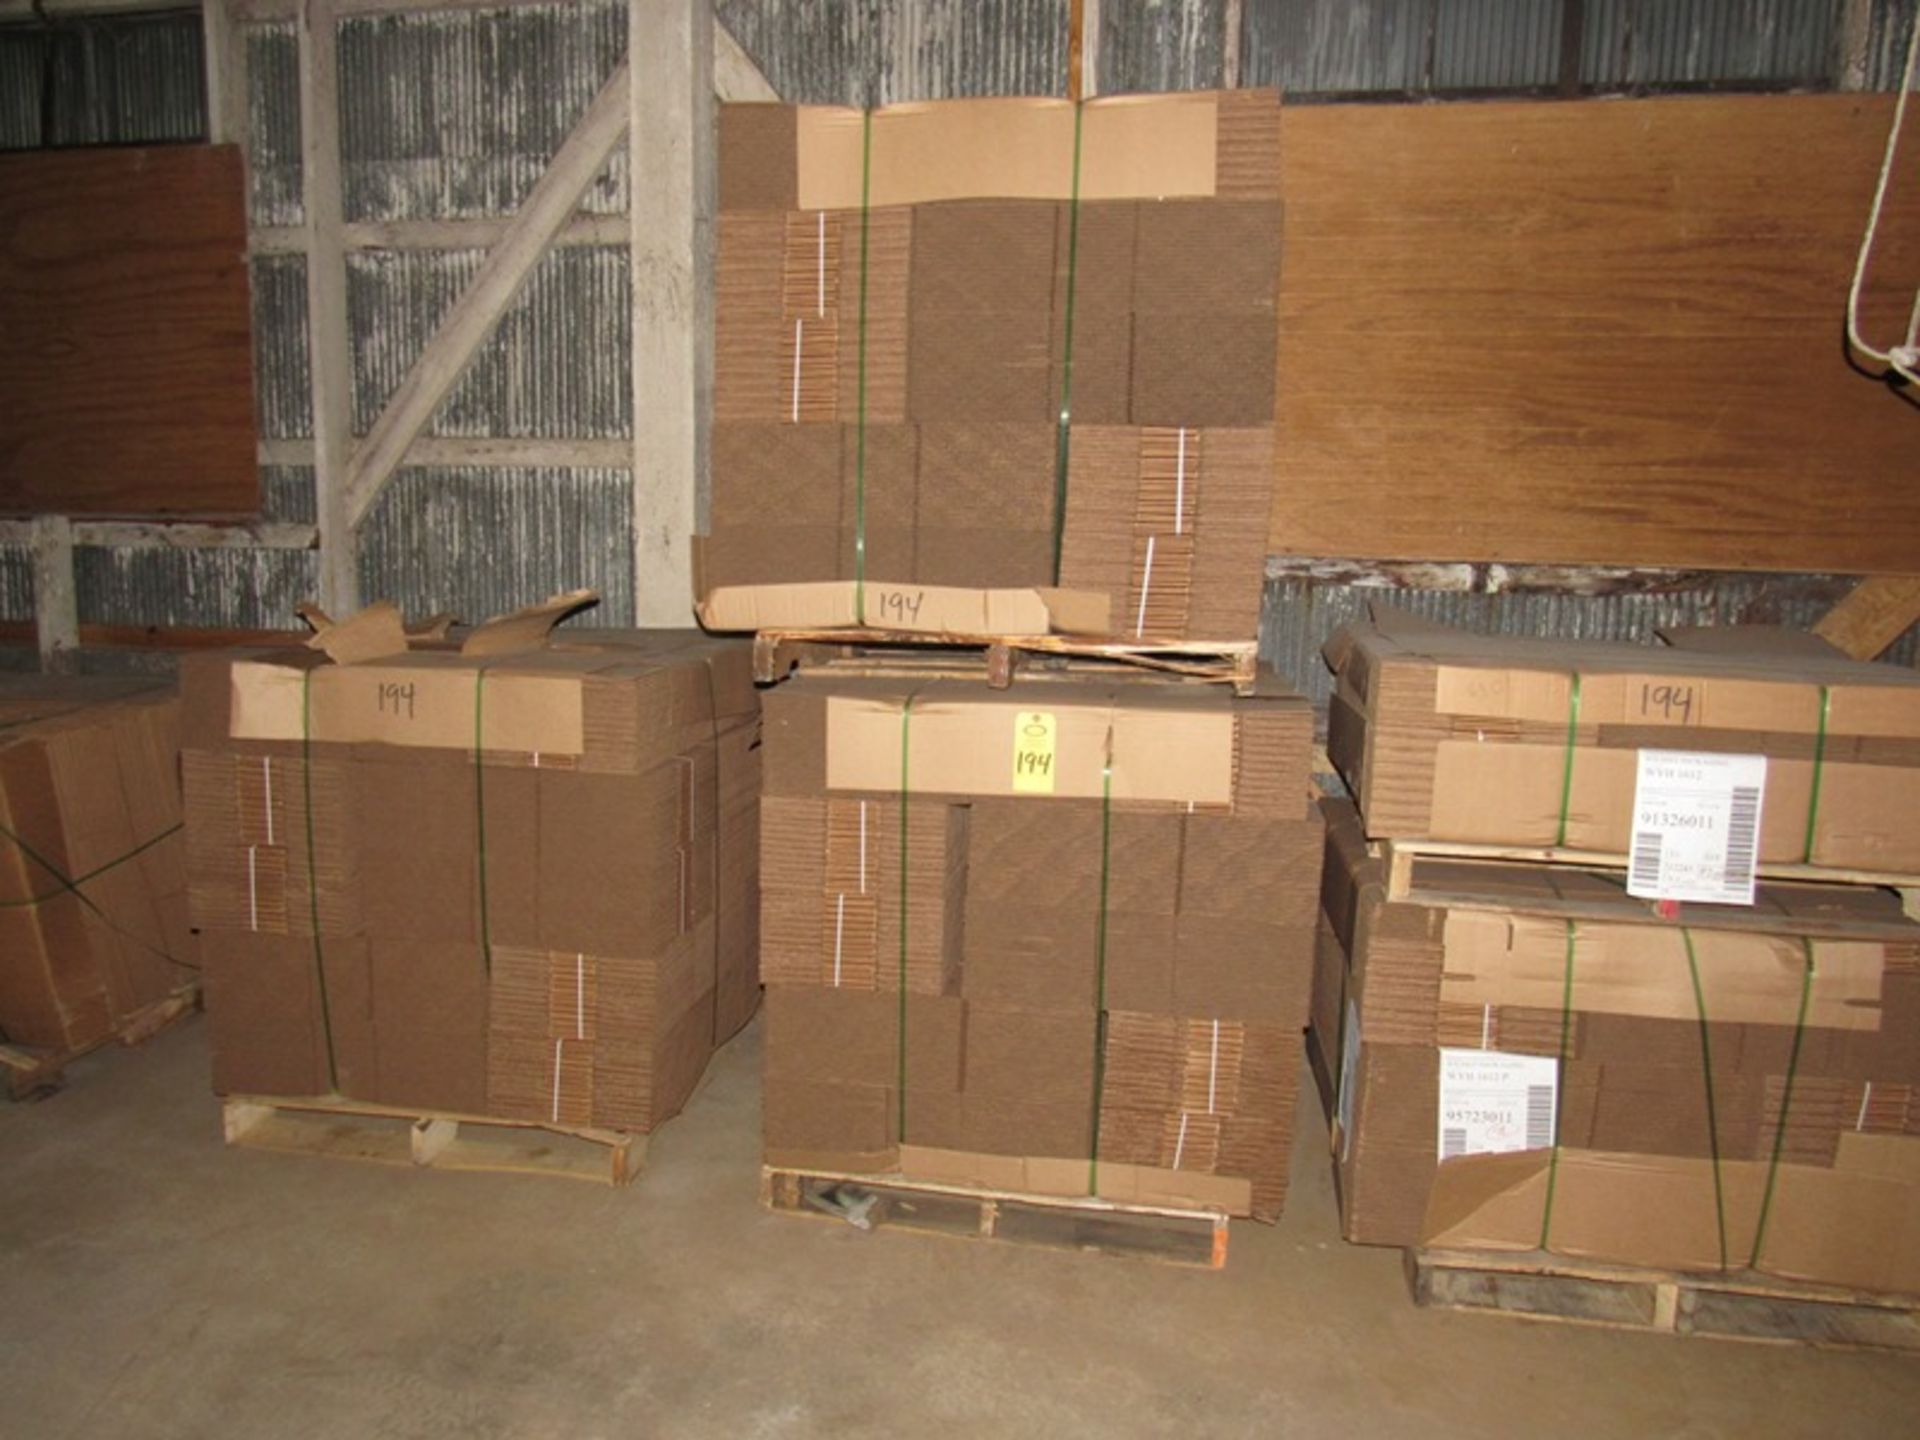 Lot of Corrugated Cartons, approx. (1980) 10" W X 16" L X 4" D (All Funds Must Be Received by Friday